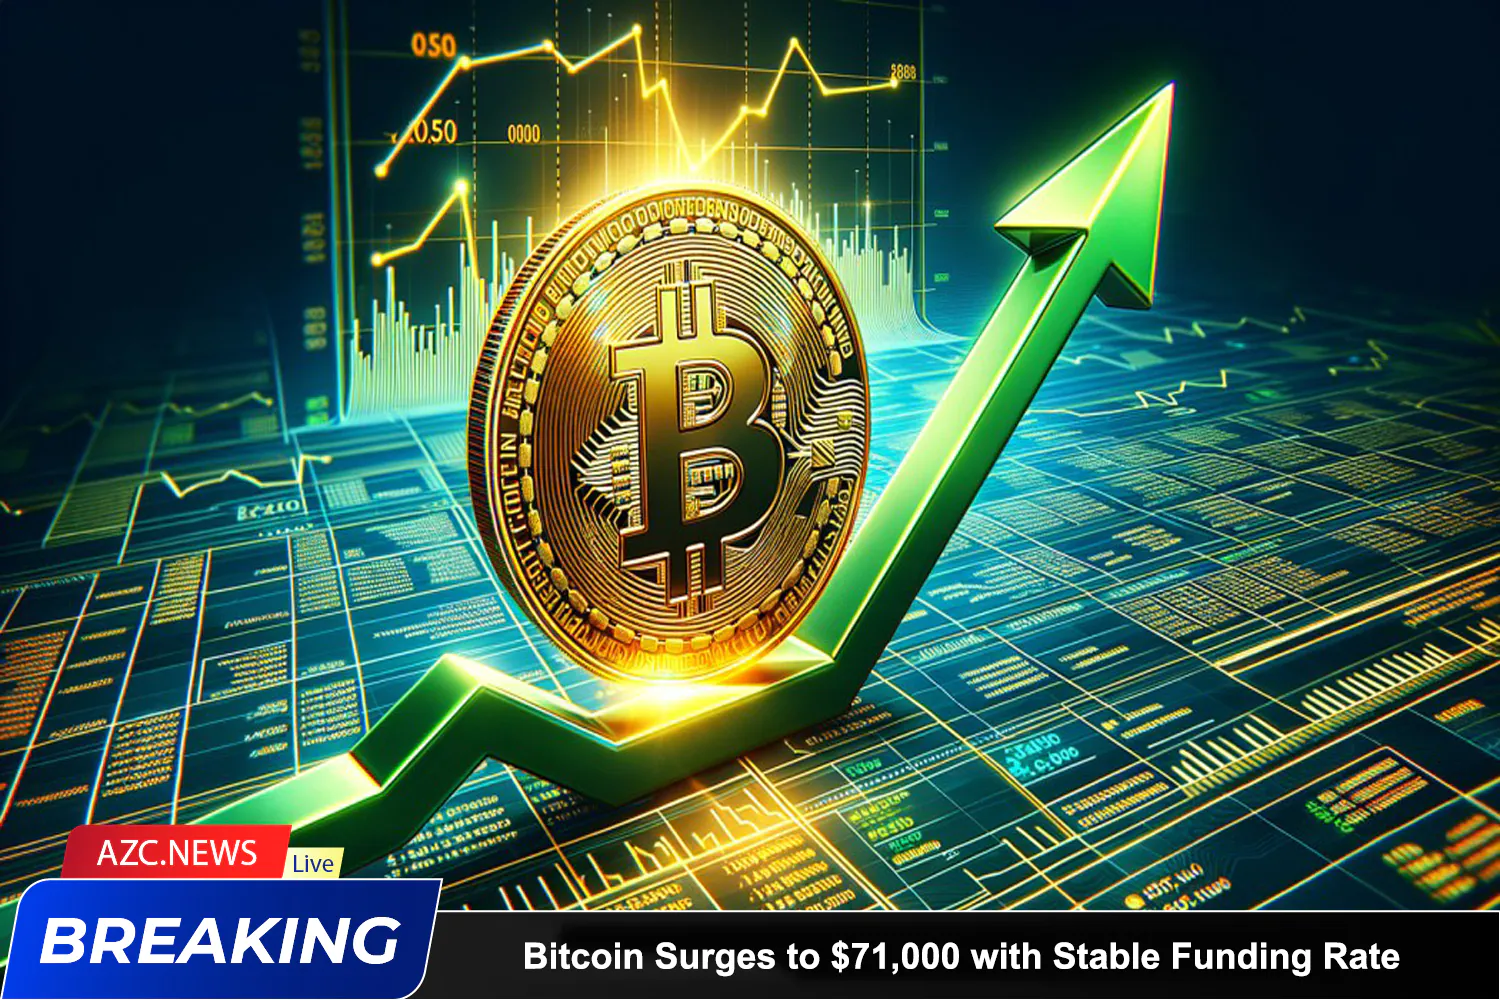 Azcnews Bitcoin Surges To $71,000 With Stable Funding Rate